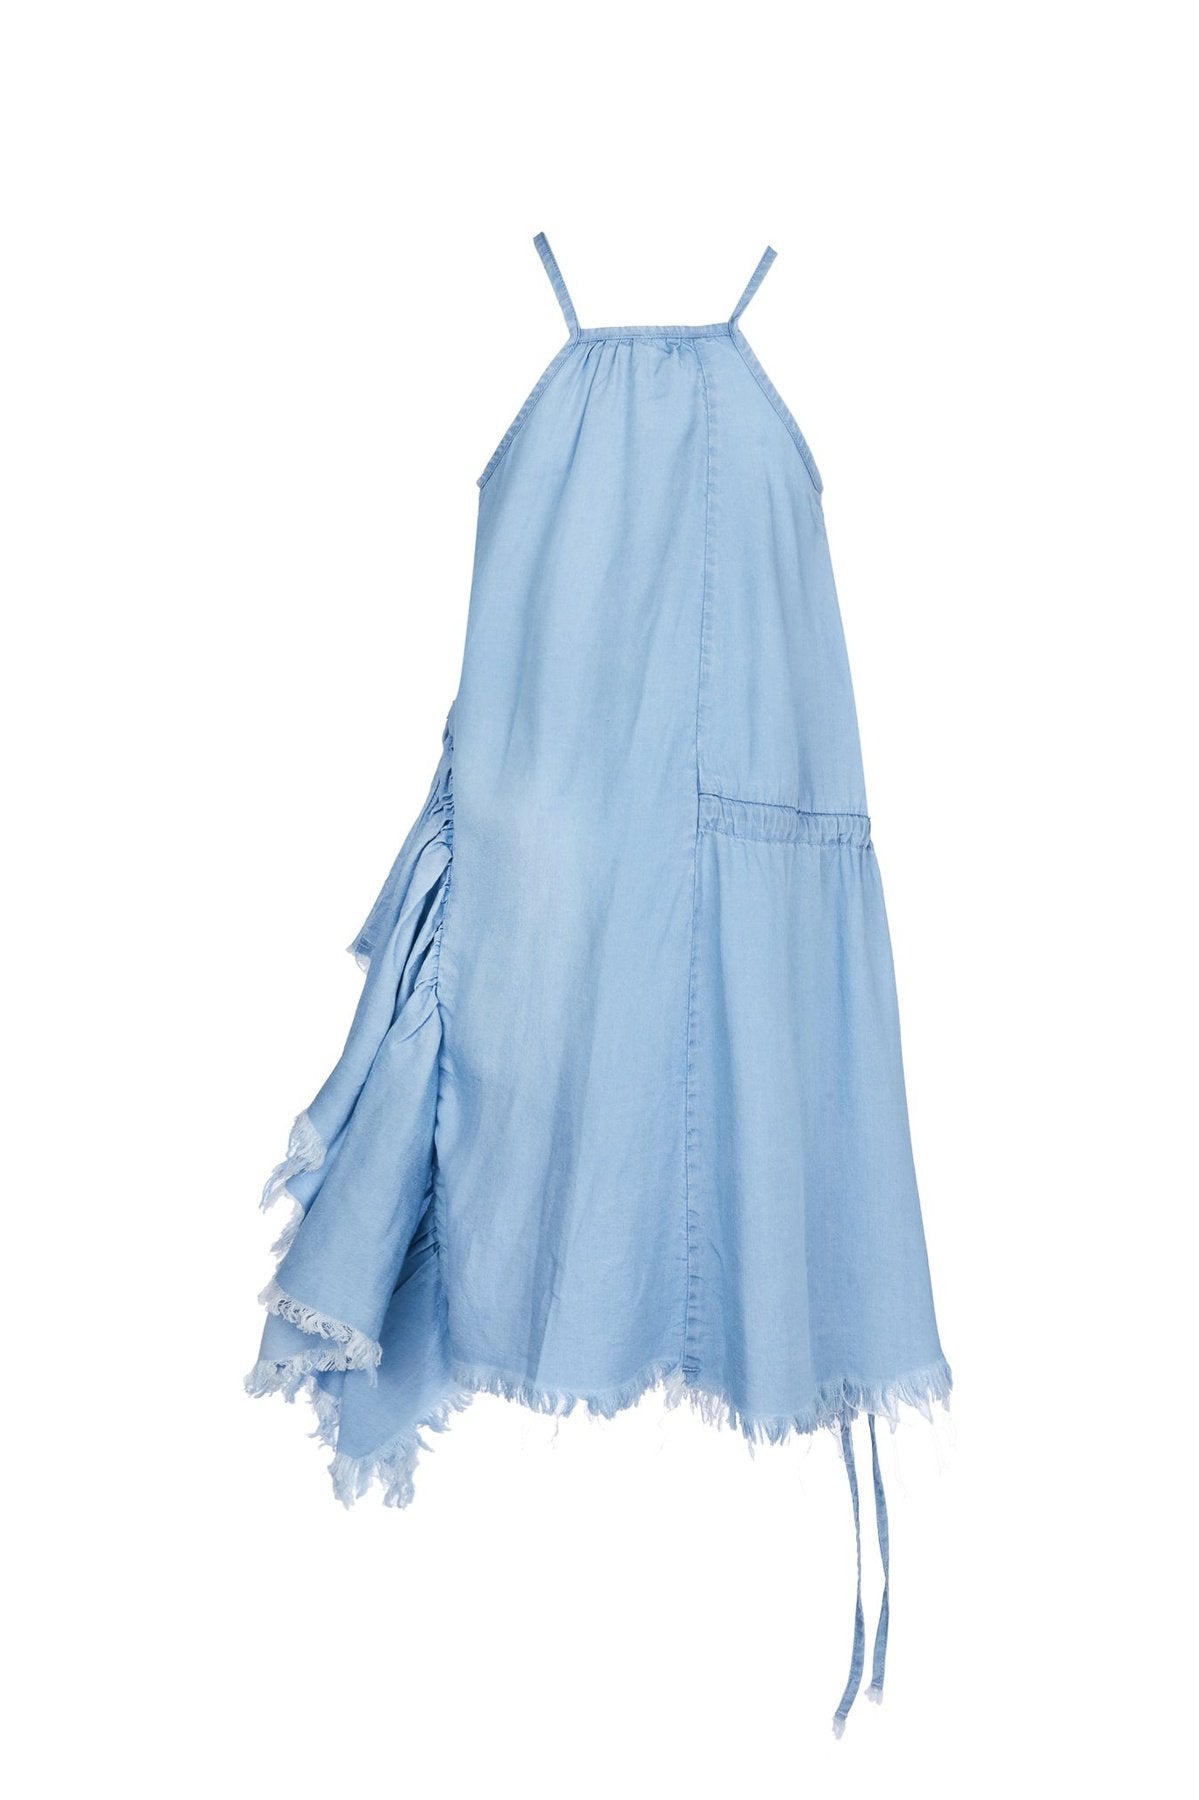 M'A KIDS GATHERED DRESS IN BABY BLUE